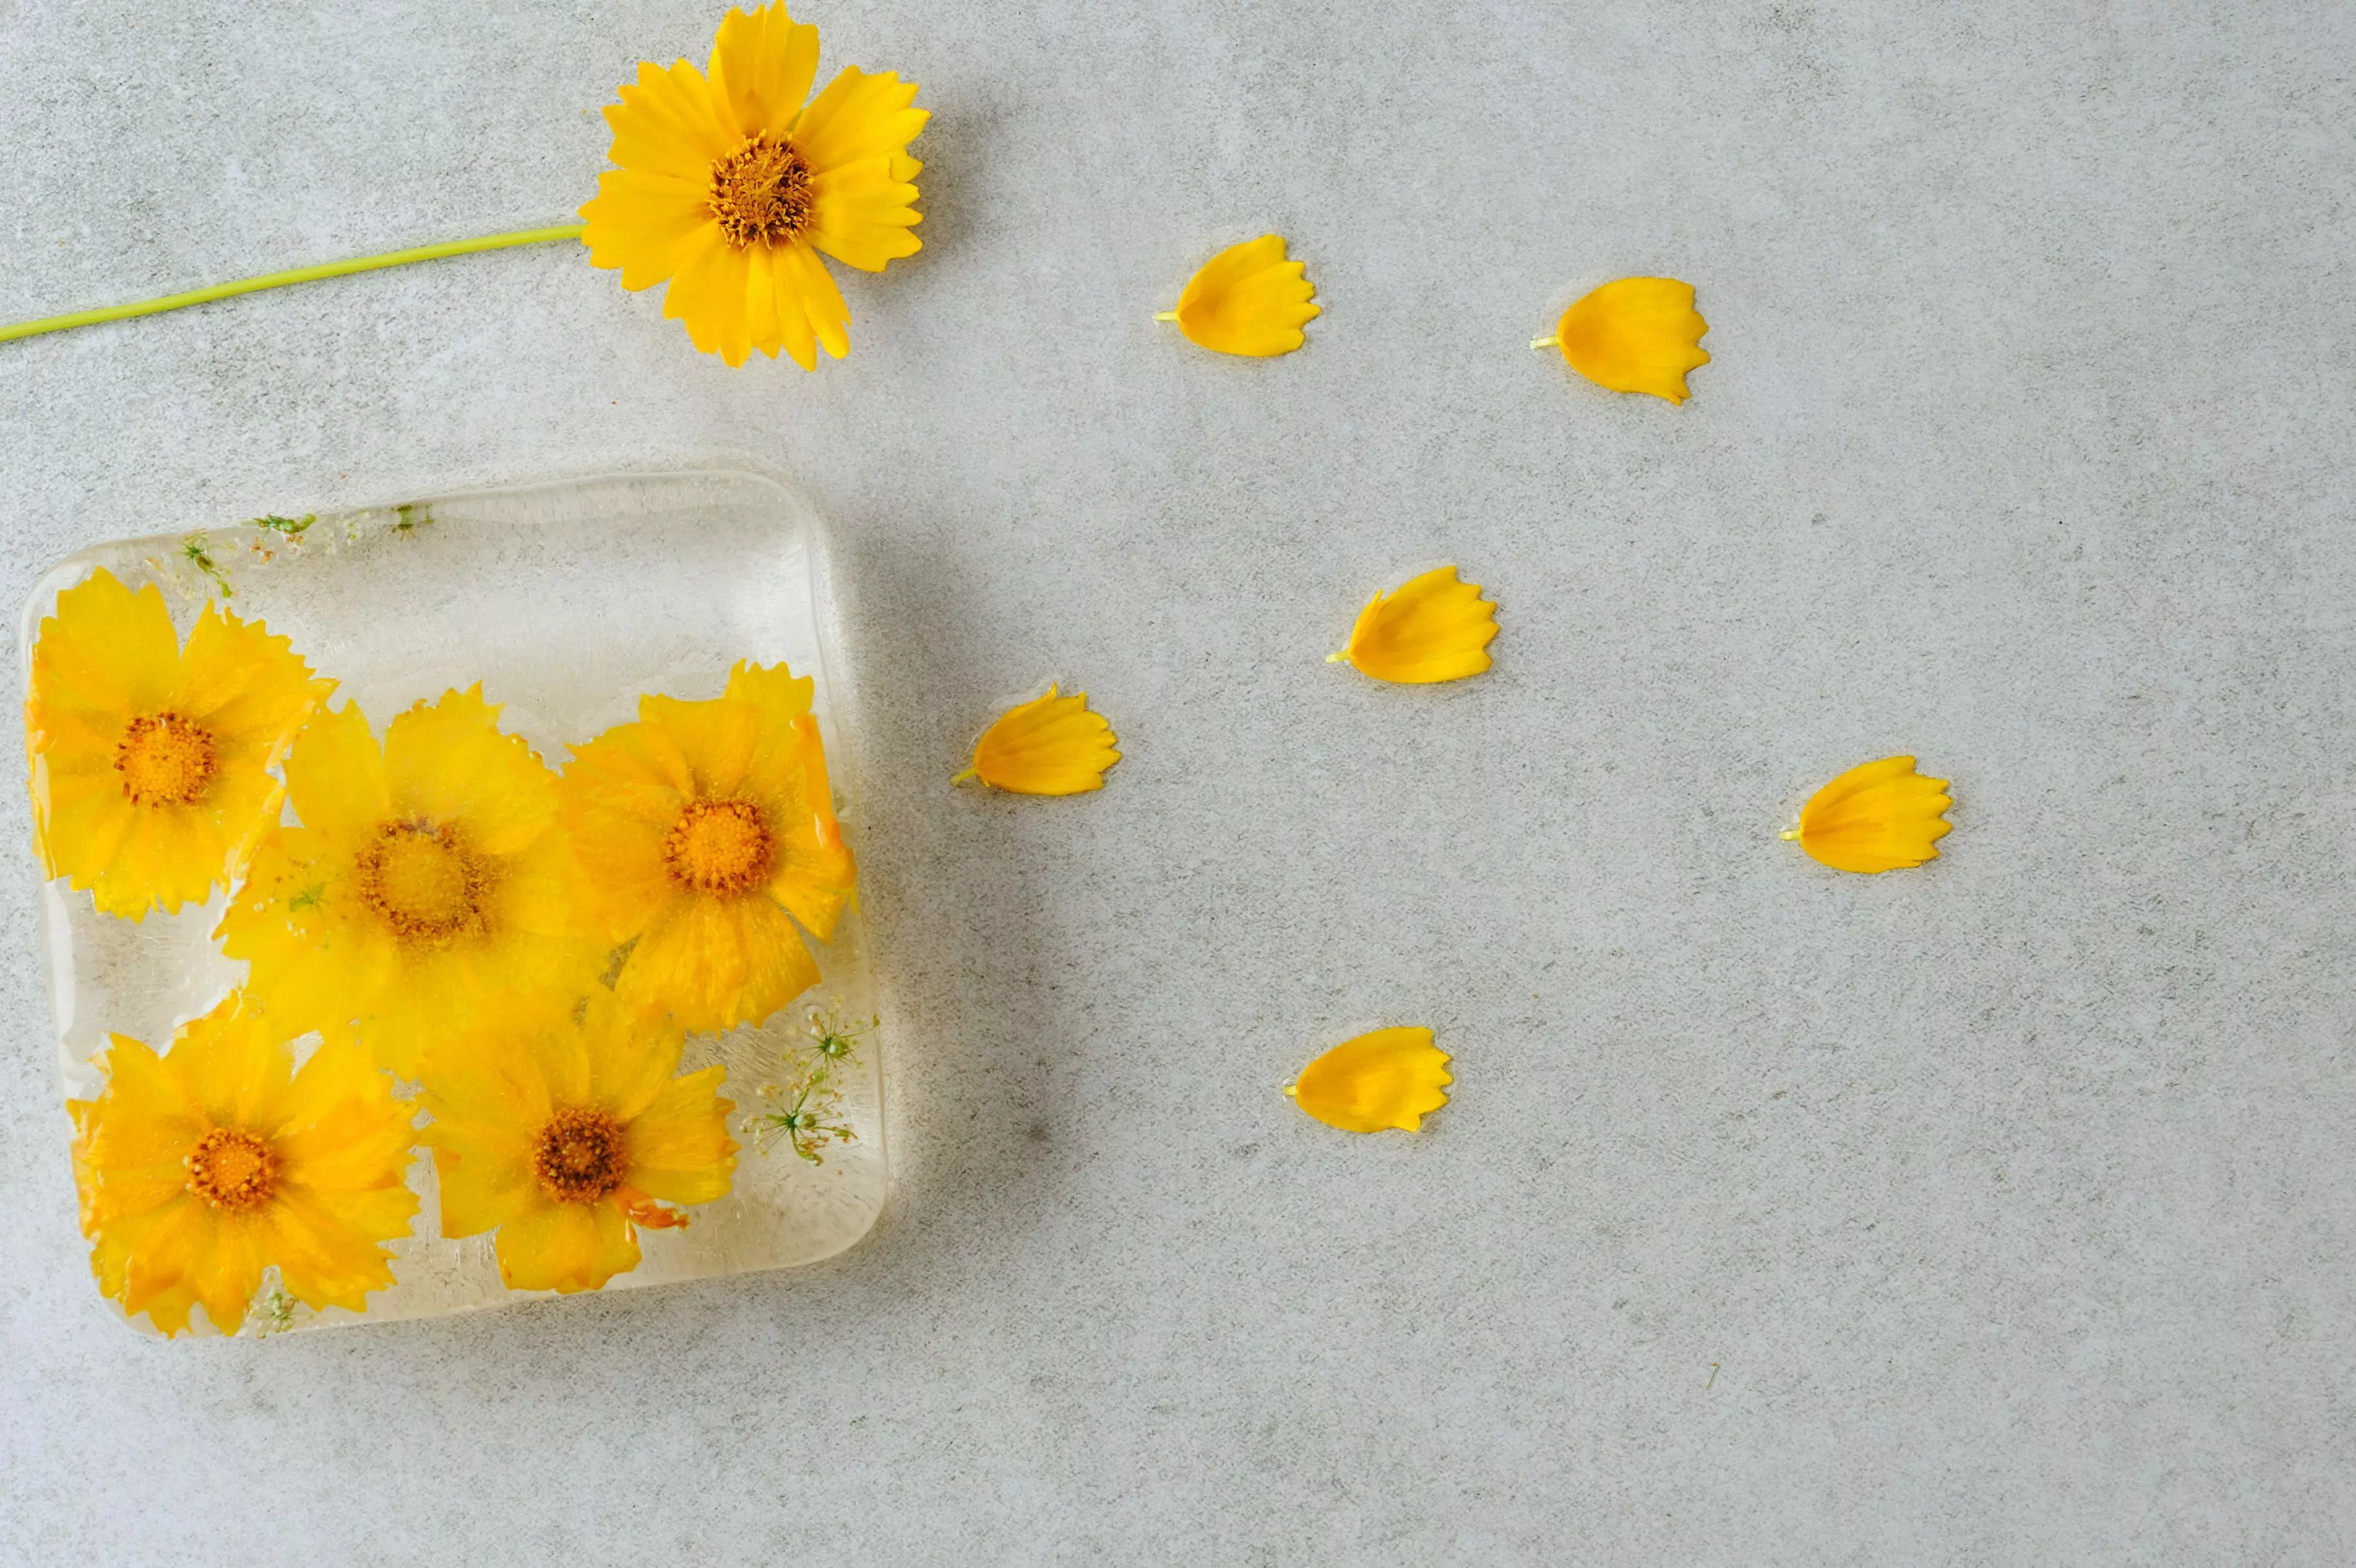 You can't just use any flowers for your ice cubes (